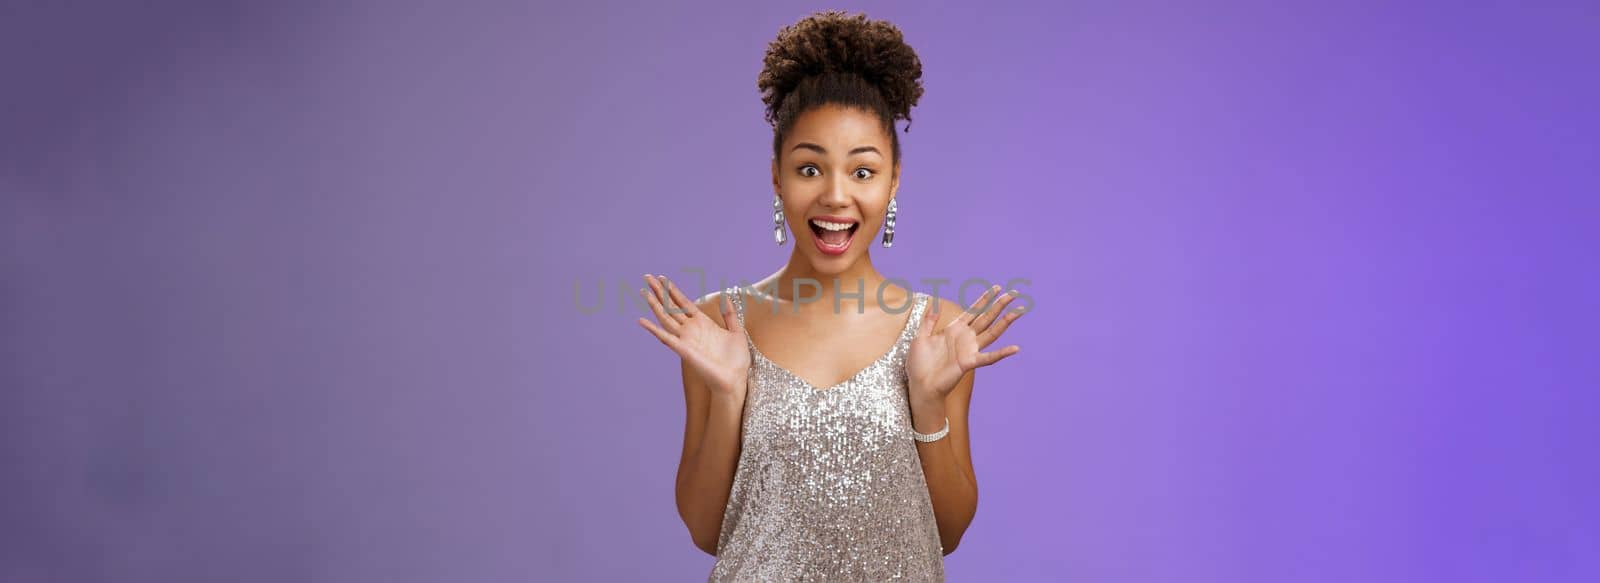 Surprised amused excited african-american woman in glittering shiny silver dress raise hands astonished pleased delighted meeting friend party smiling thrilled standing blue background amazed.